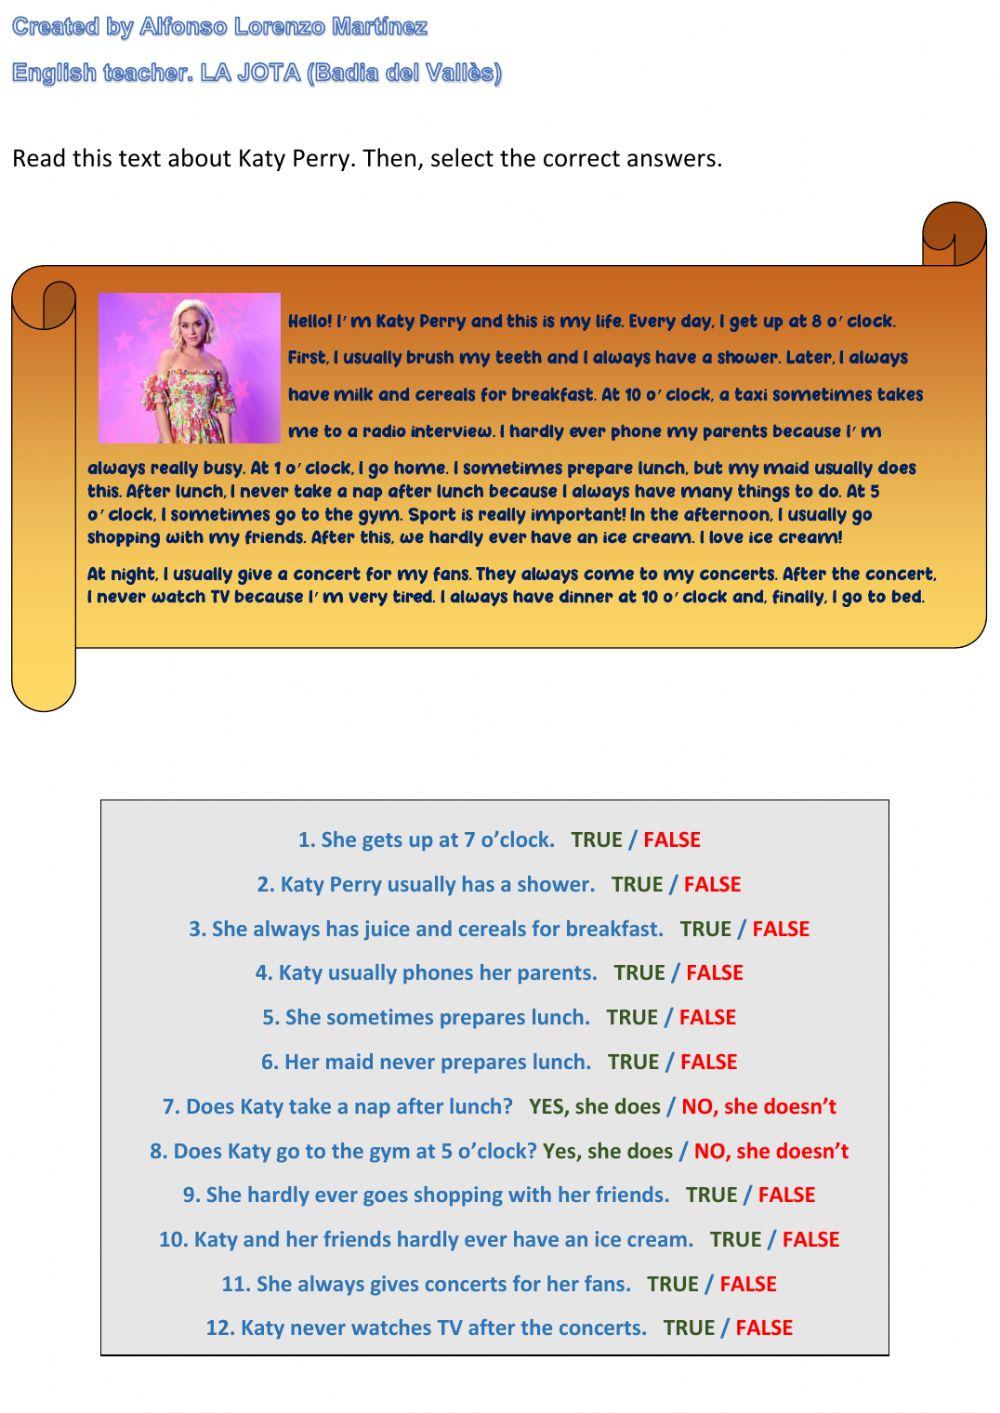 Frequency adverbs 03